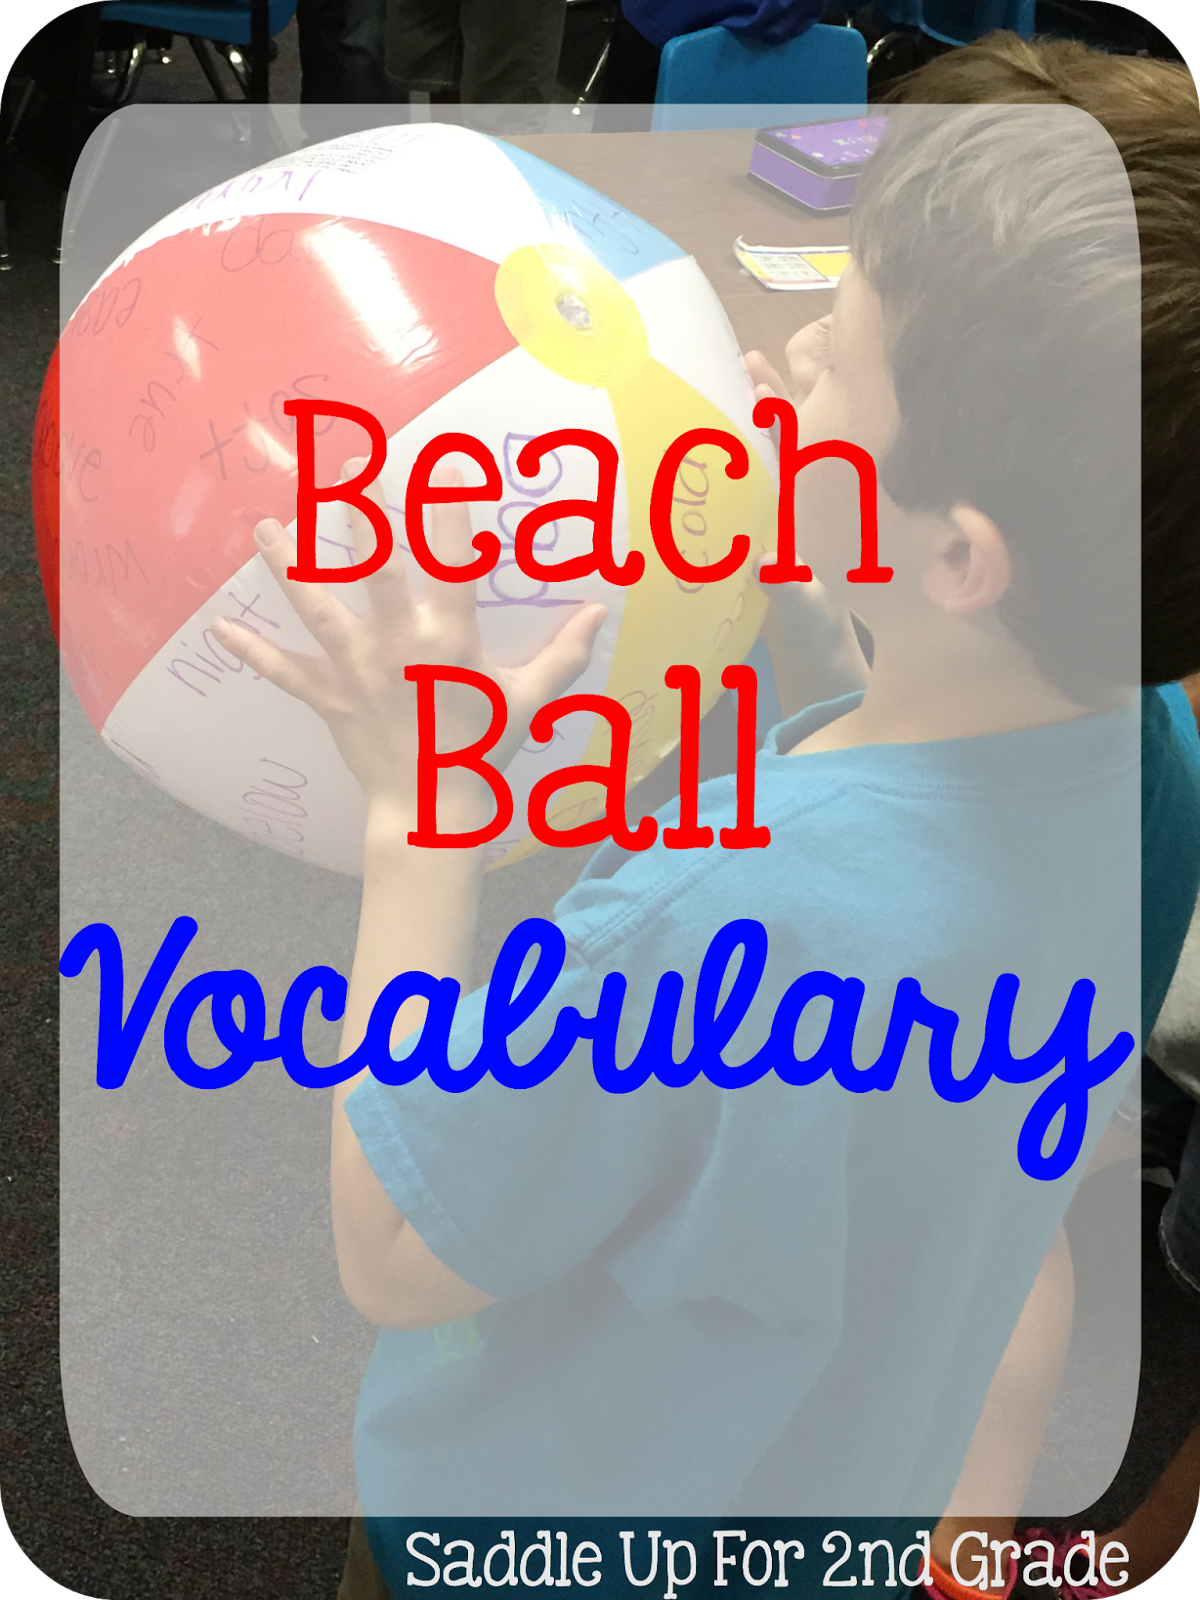 Beach Ball Vocabulary by Saddle Up For 2nd Grade